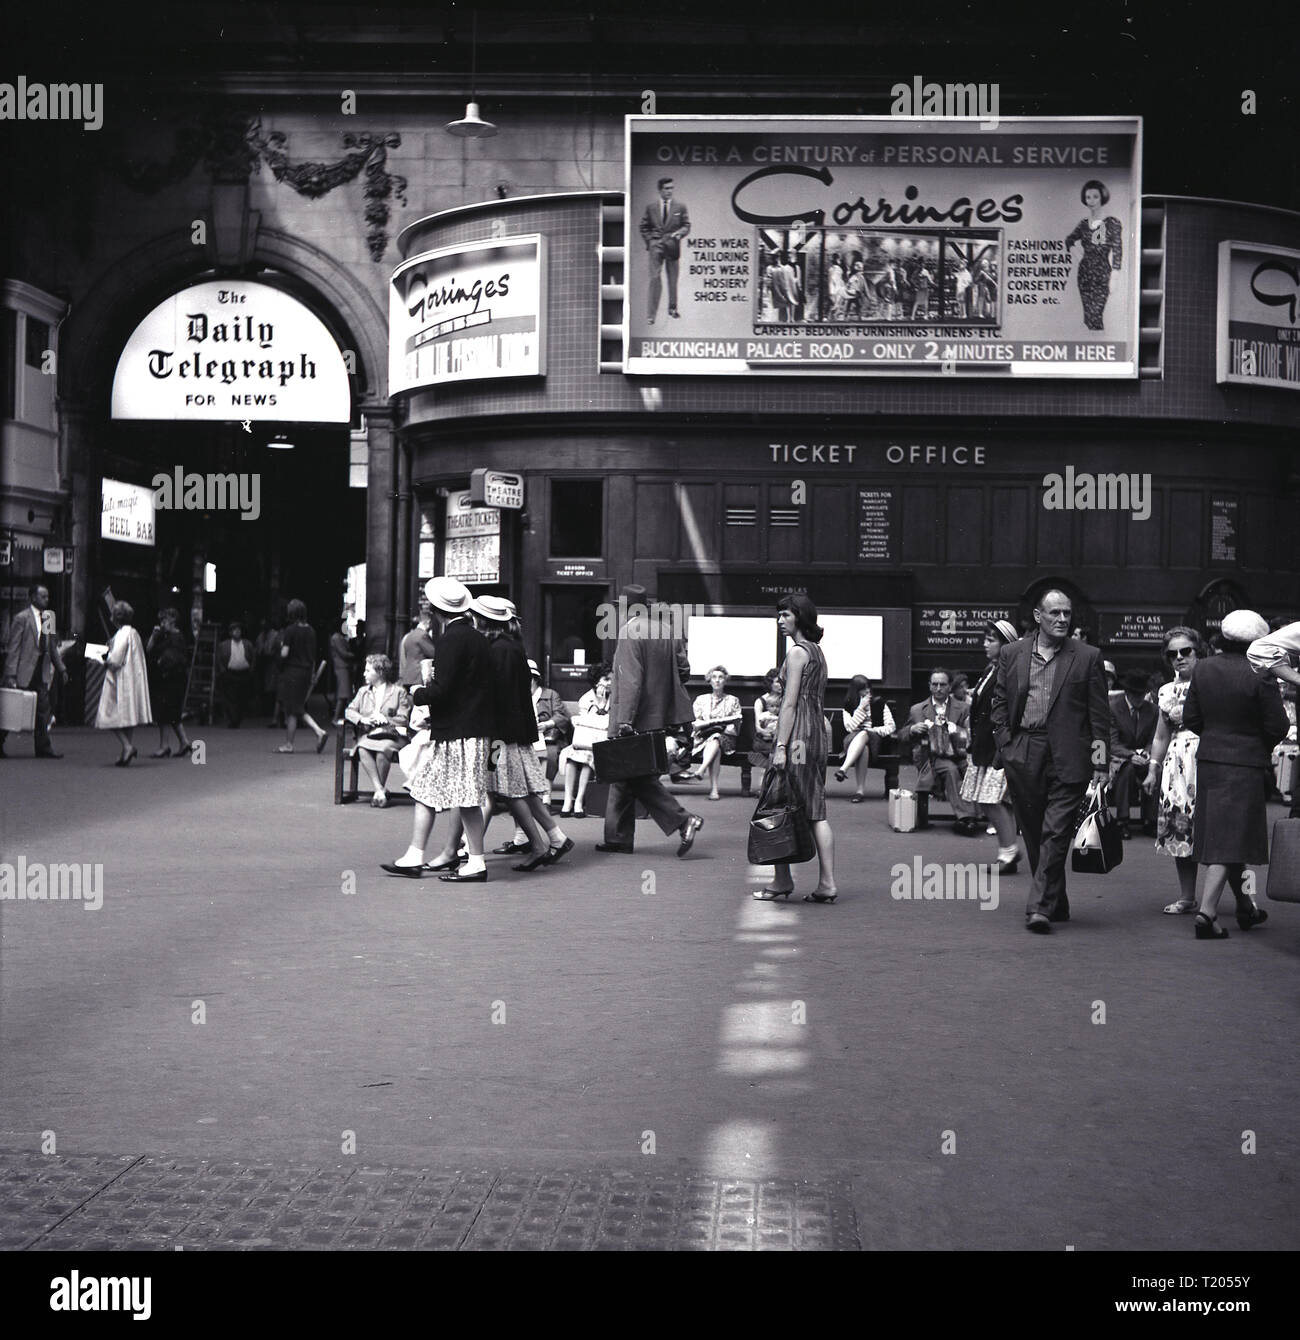 1960, historical, Victoria train station, London, showing commuters, ticket office and promotional billboards, with adverts for the Daily Telegraph daily newspaper and for the department store Gorringes in Buckingham Palace Road, advertising over 100 years of personal service. Frederick Gorringe opened a small drapery store there in 1858 and it became a well-known, fashionable store until its closure in 1968. Stock Photo